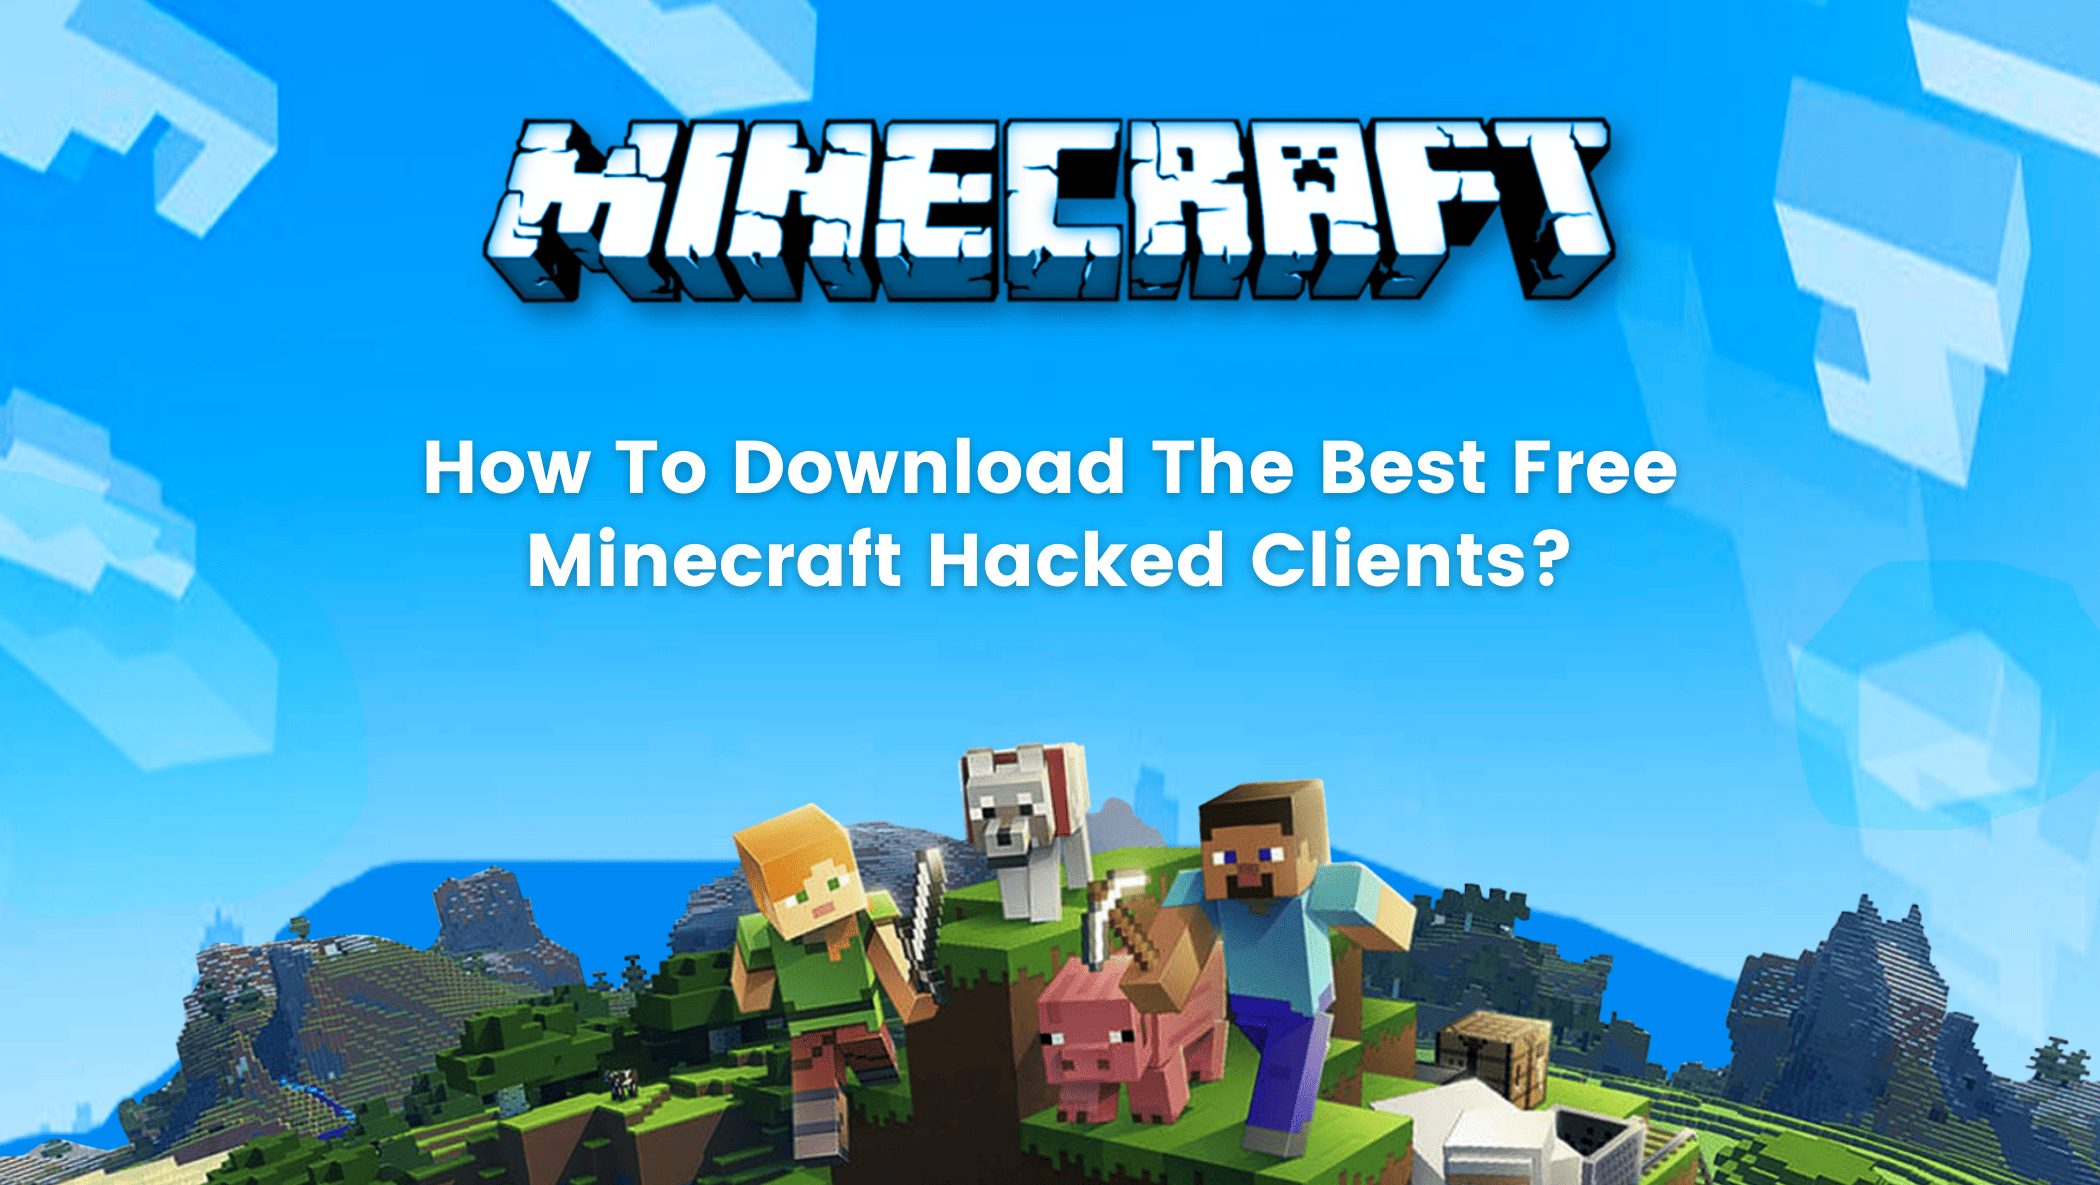 How To Download The Best Free Minecraft Hacked Clients